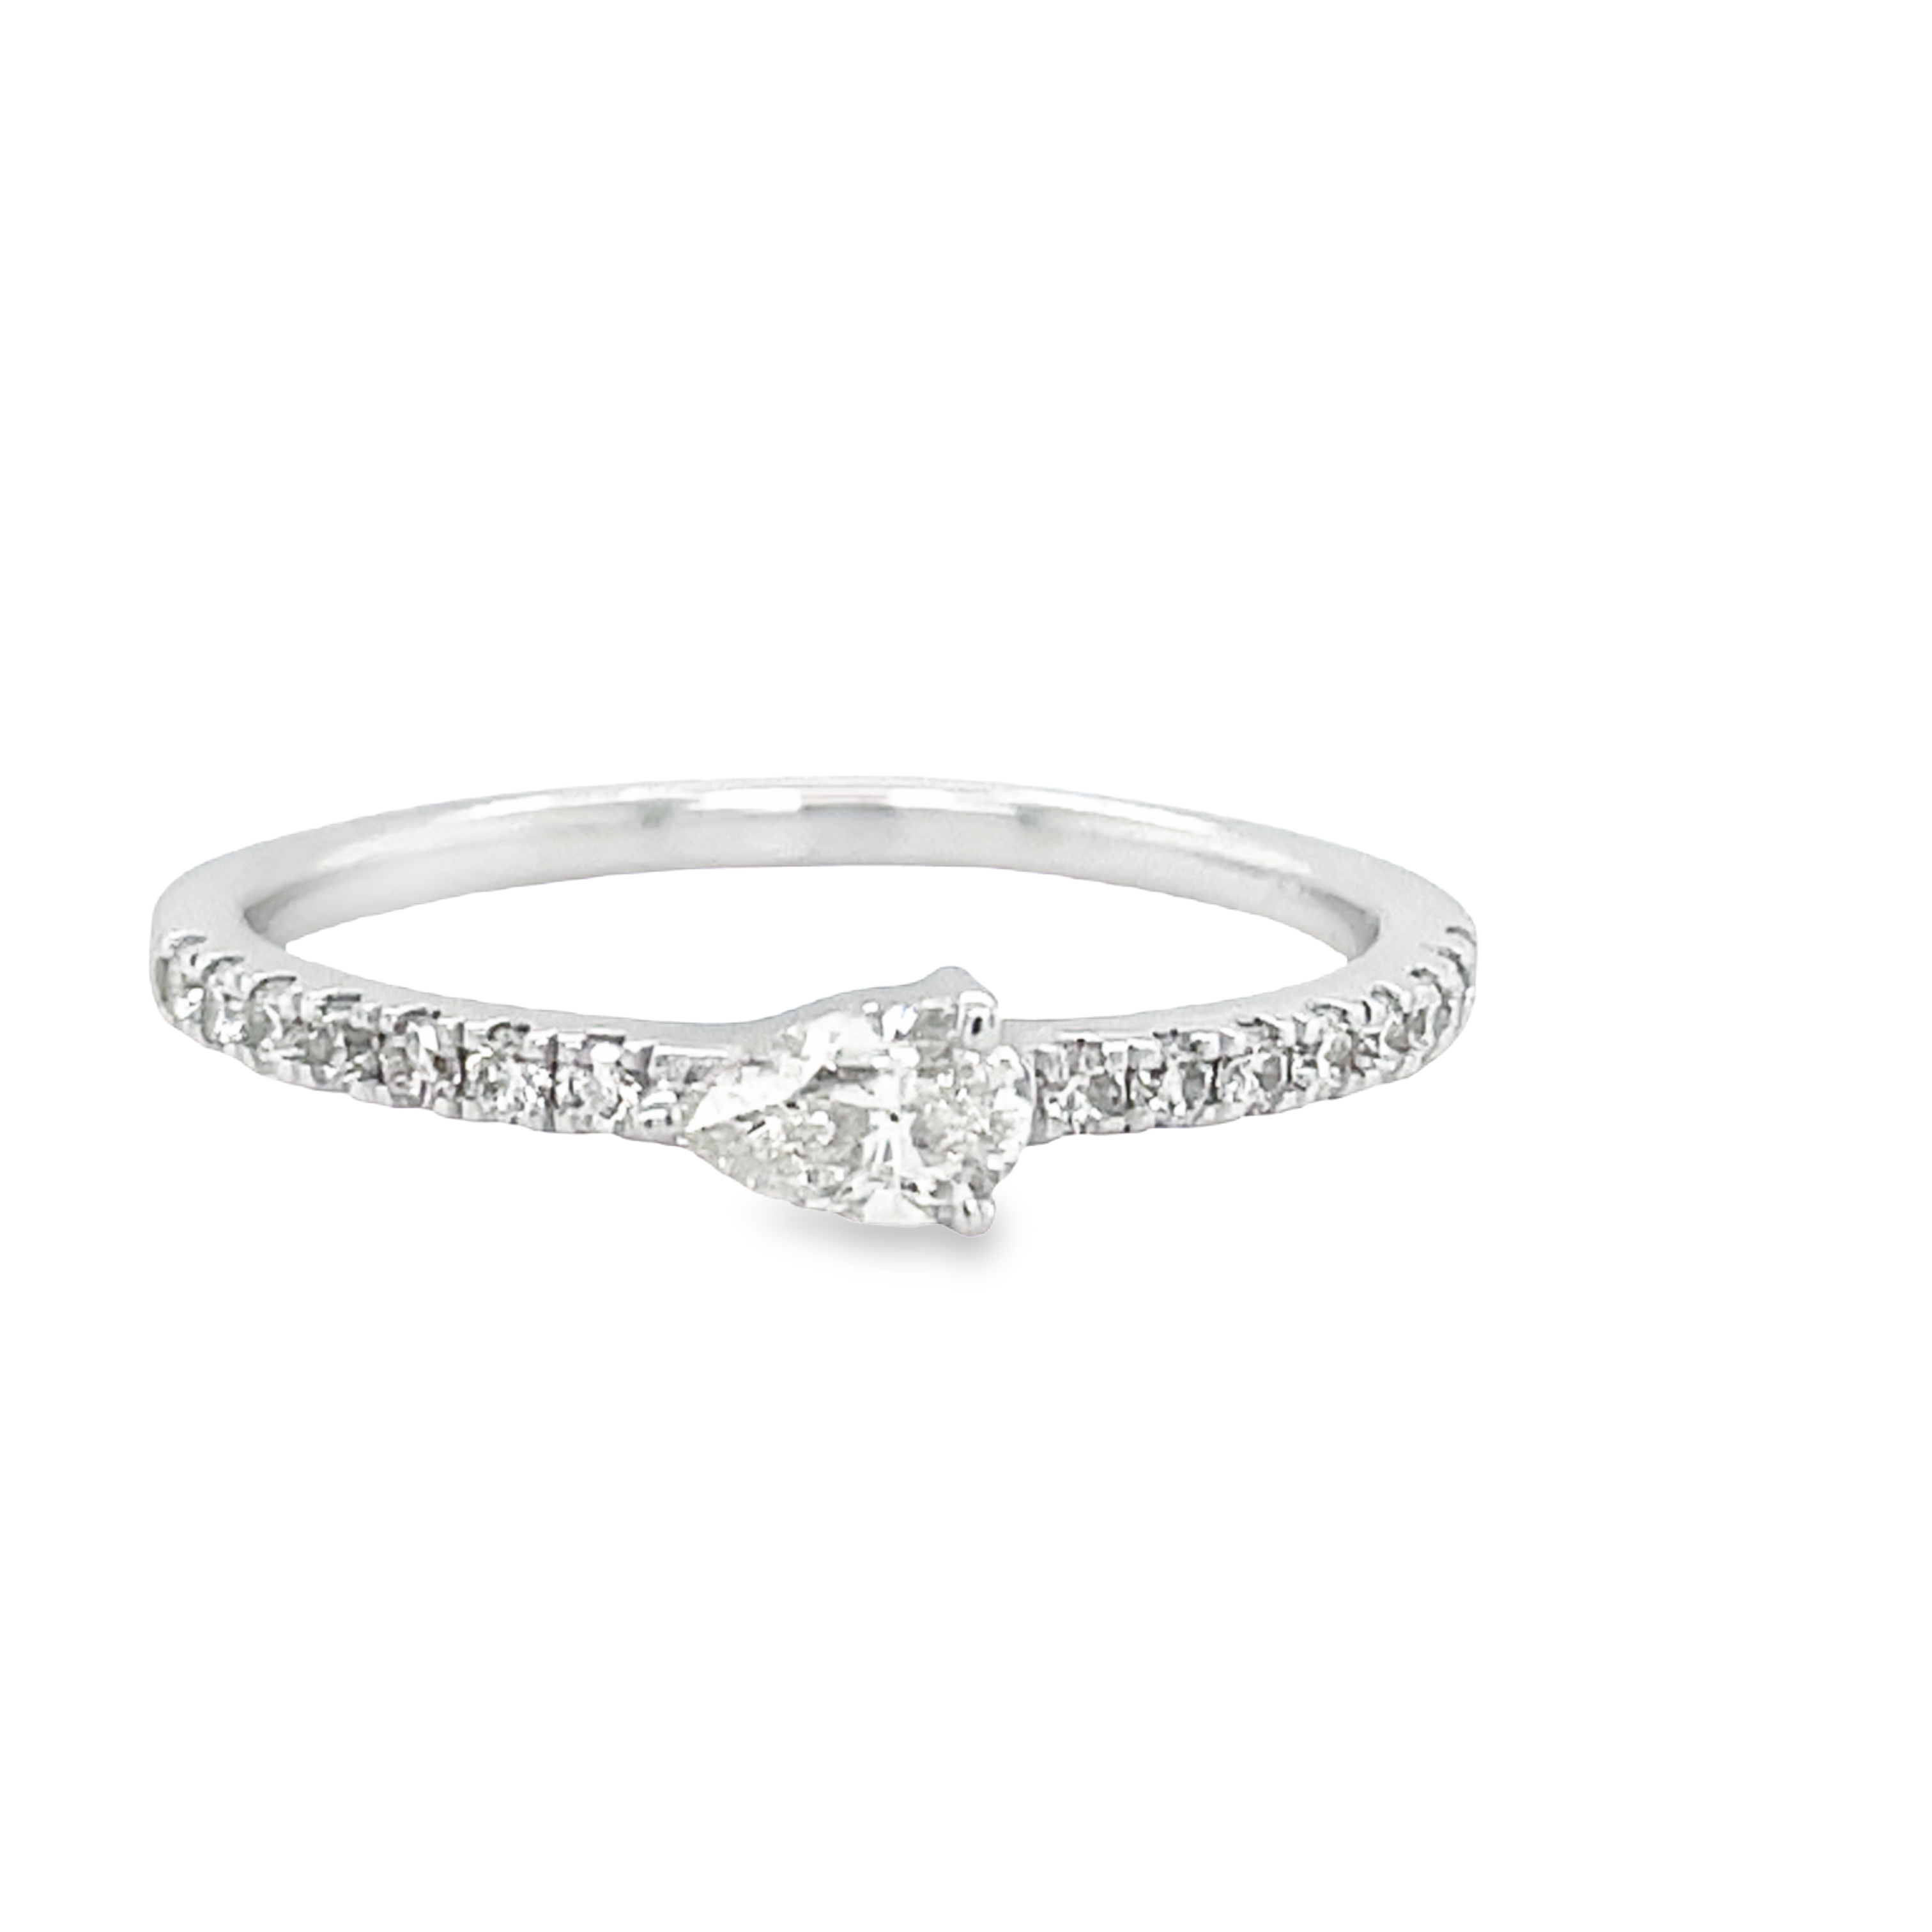 A breathtakingly beautiful ring, this dainty pear-cut (0.57 ct, East West facing) diamond is set in a 14 kt white gold band and surrounded by small sparkling diamonds. Exuding sophistication and glamour, this diamond ring is sure to add an eye-catching sparkle that will make your look timeless. 